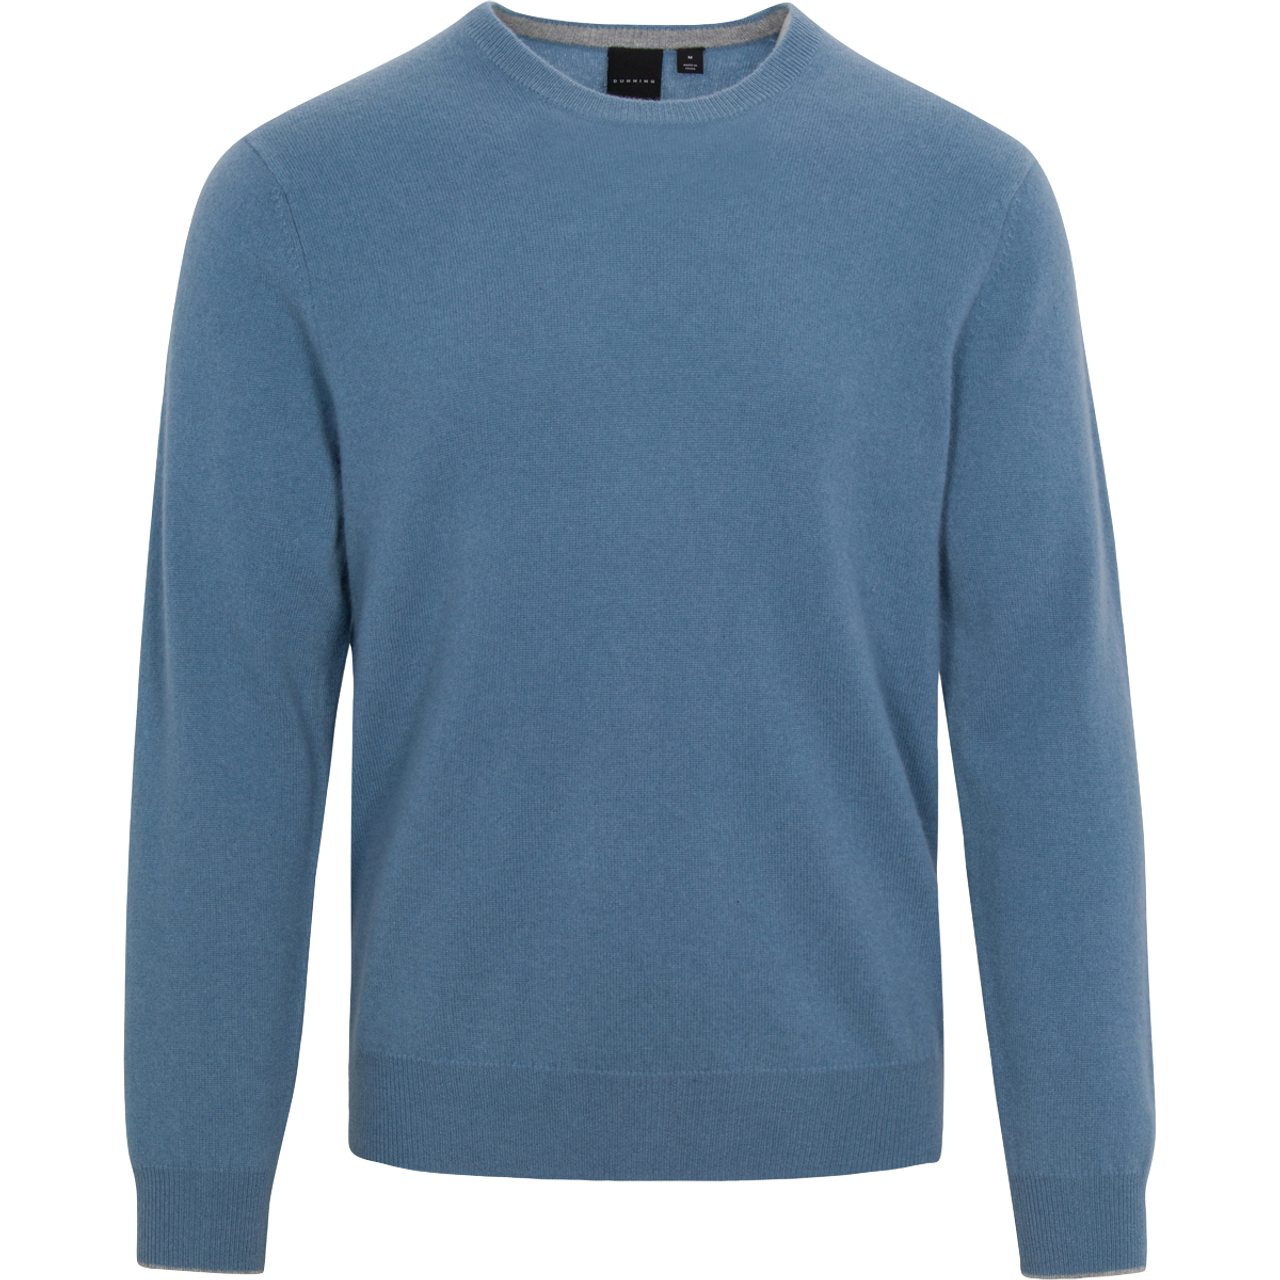 Campbell Cashmere Crew Neck Sweater - Dunning